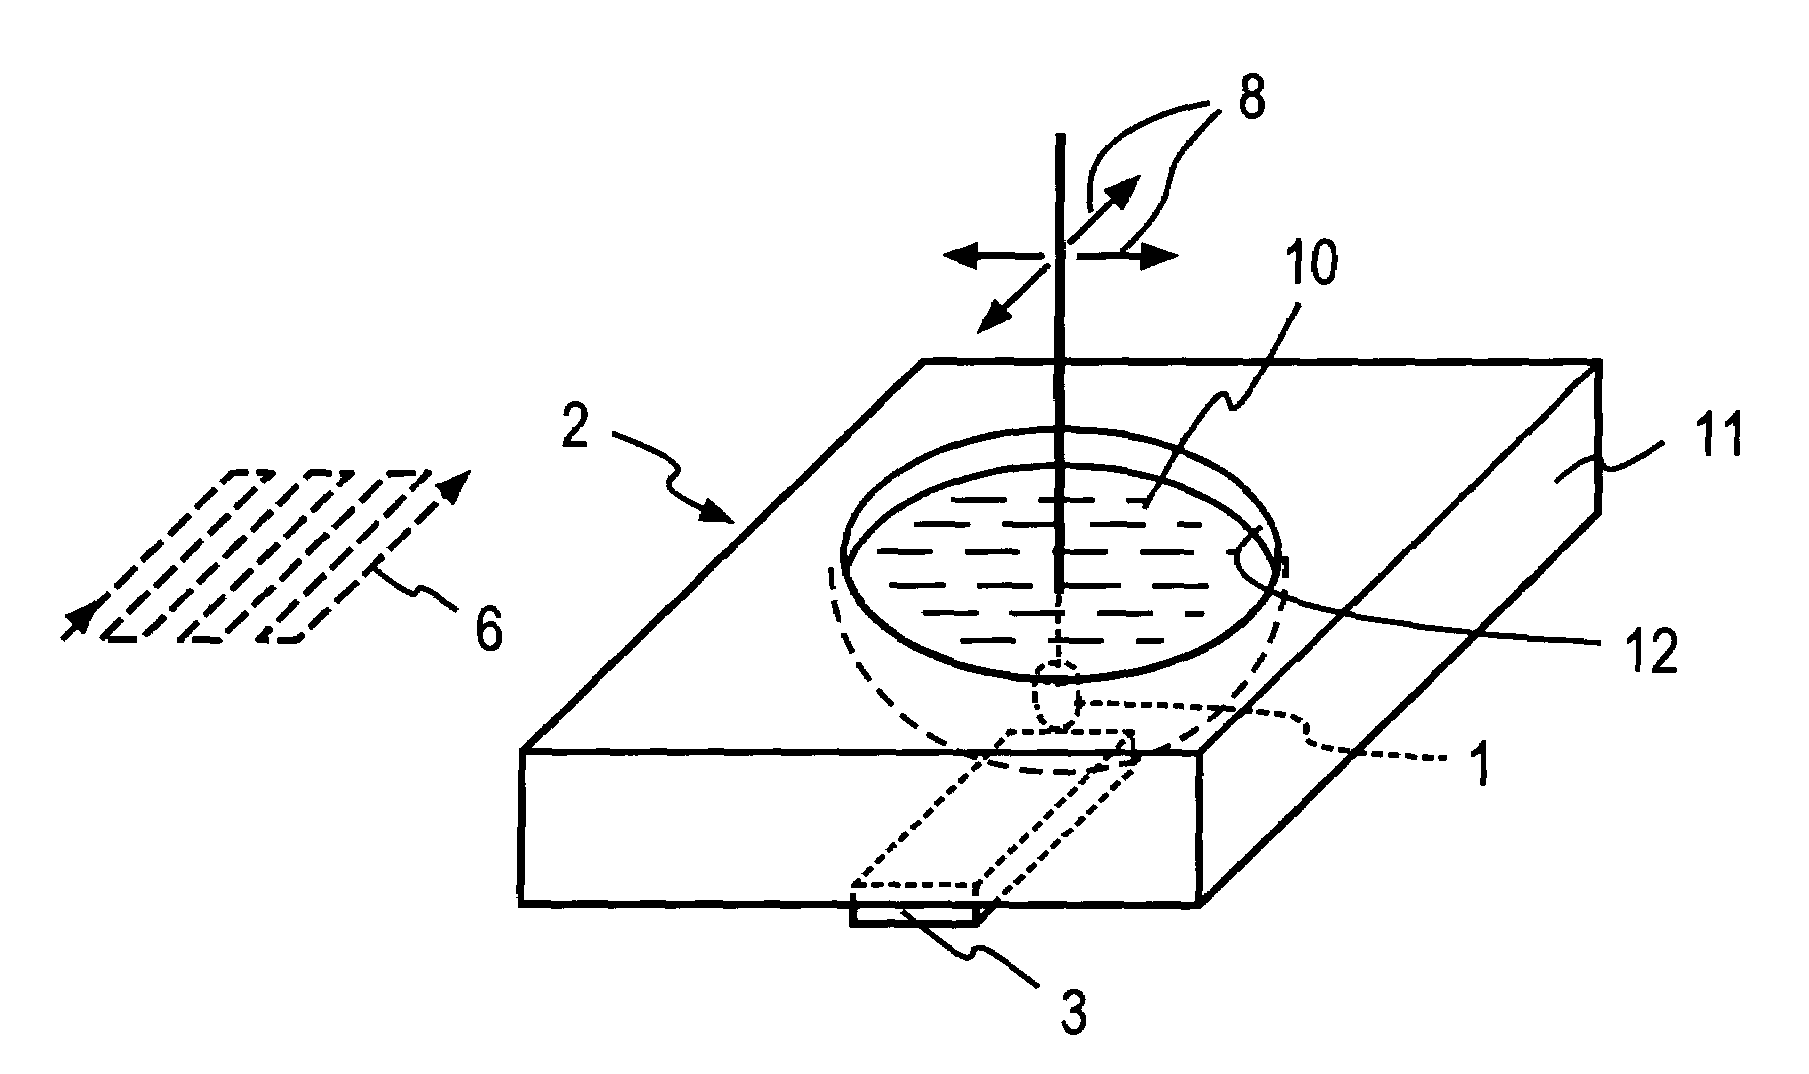 Absorption power measuring device